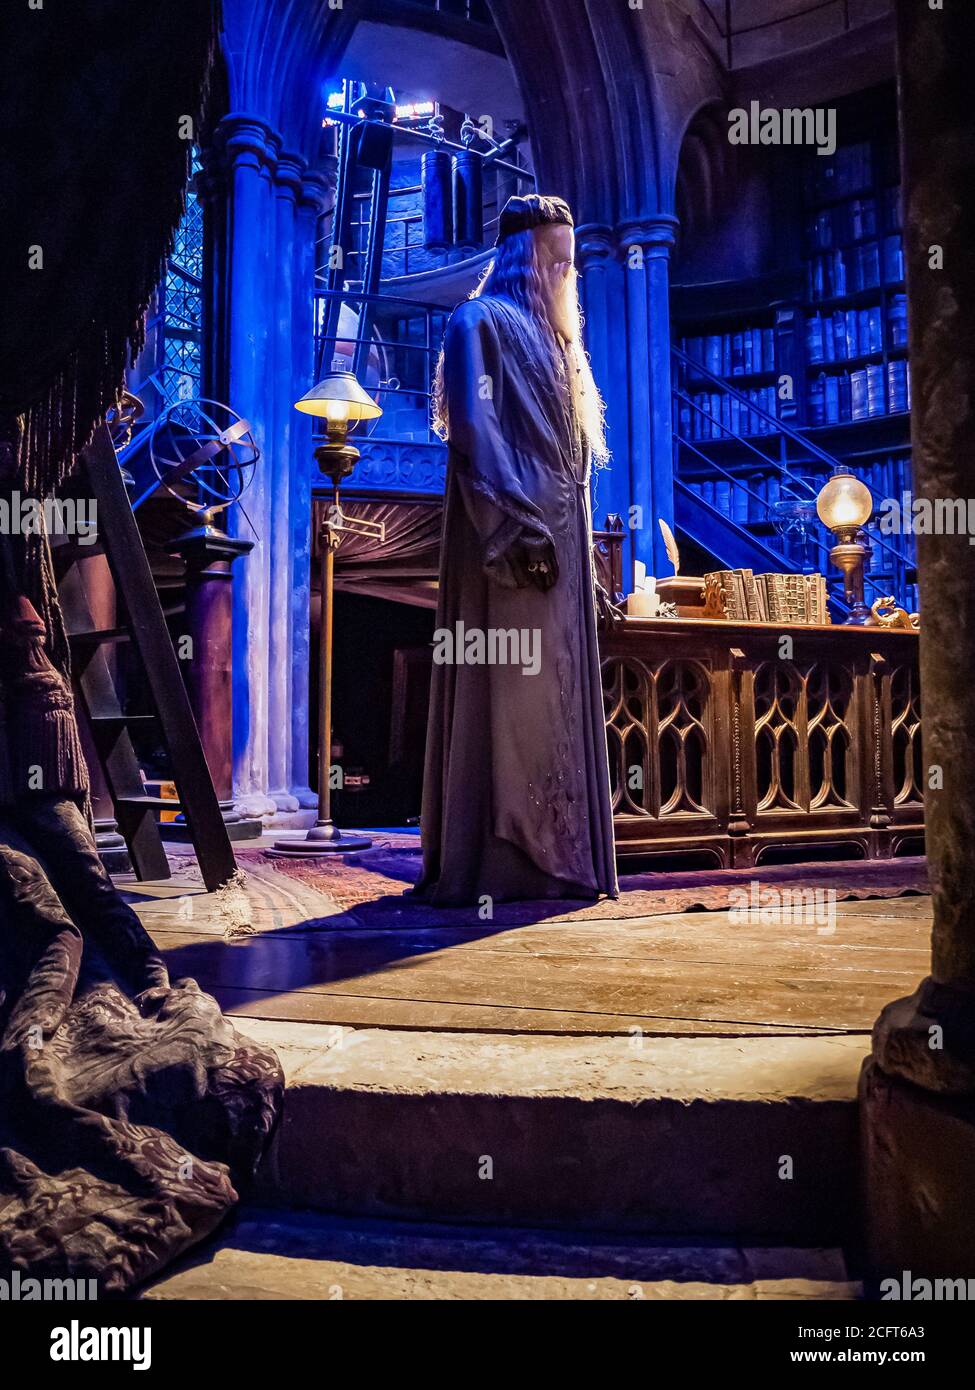 Harry potter shop hi-res stock photography and images - Alamy